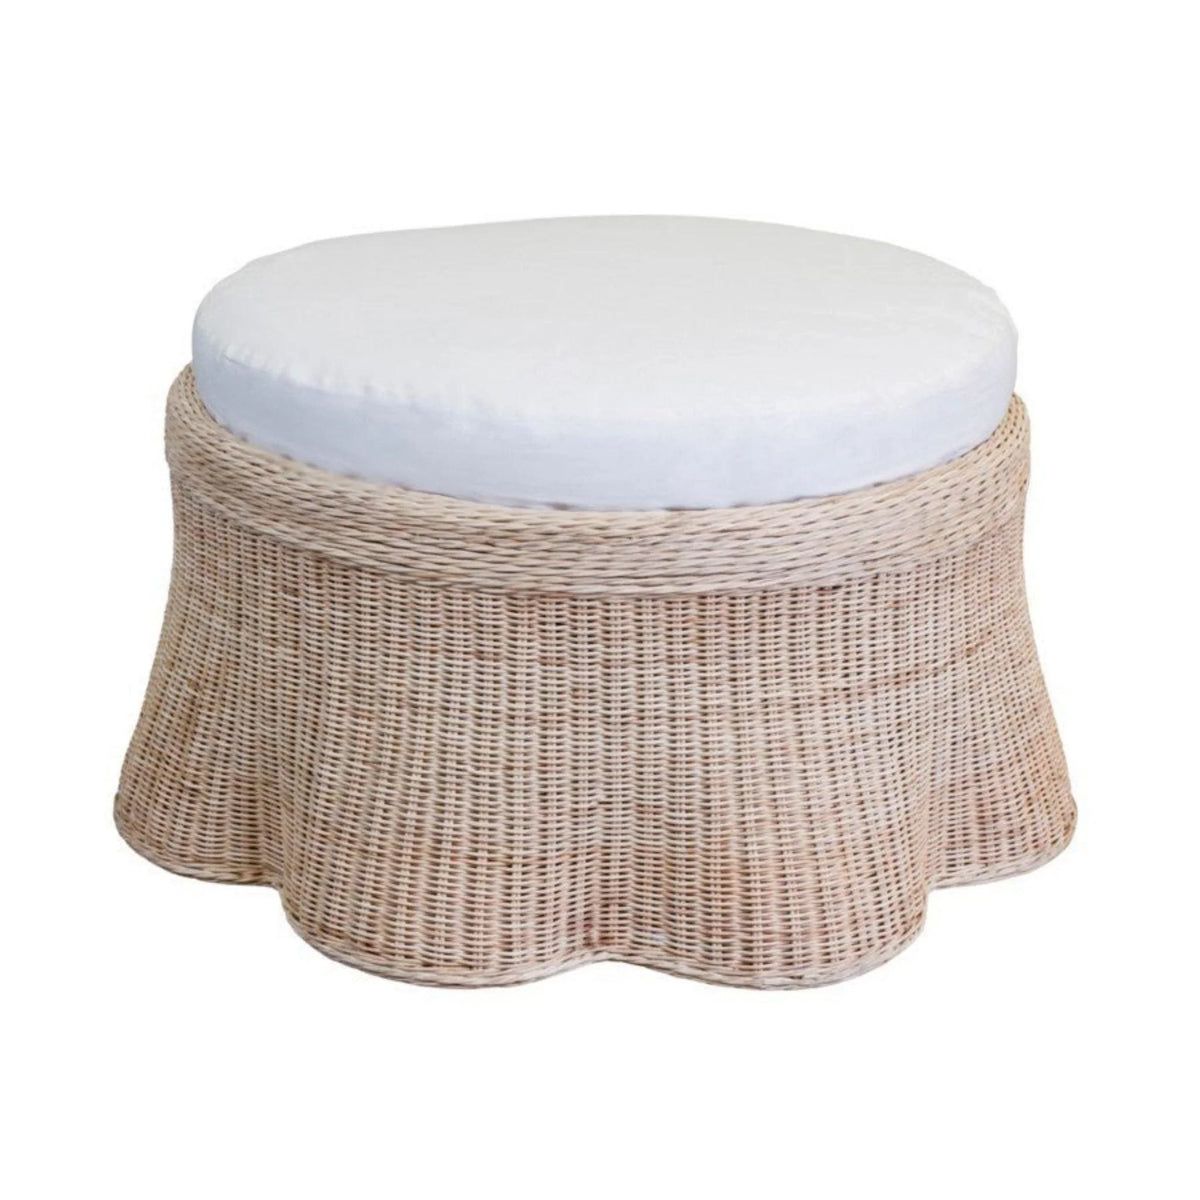 Scalloped Large Round Upholstered Wicker Ottoman | The Well Appointed House, LLC